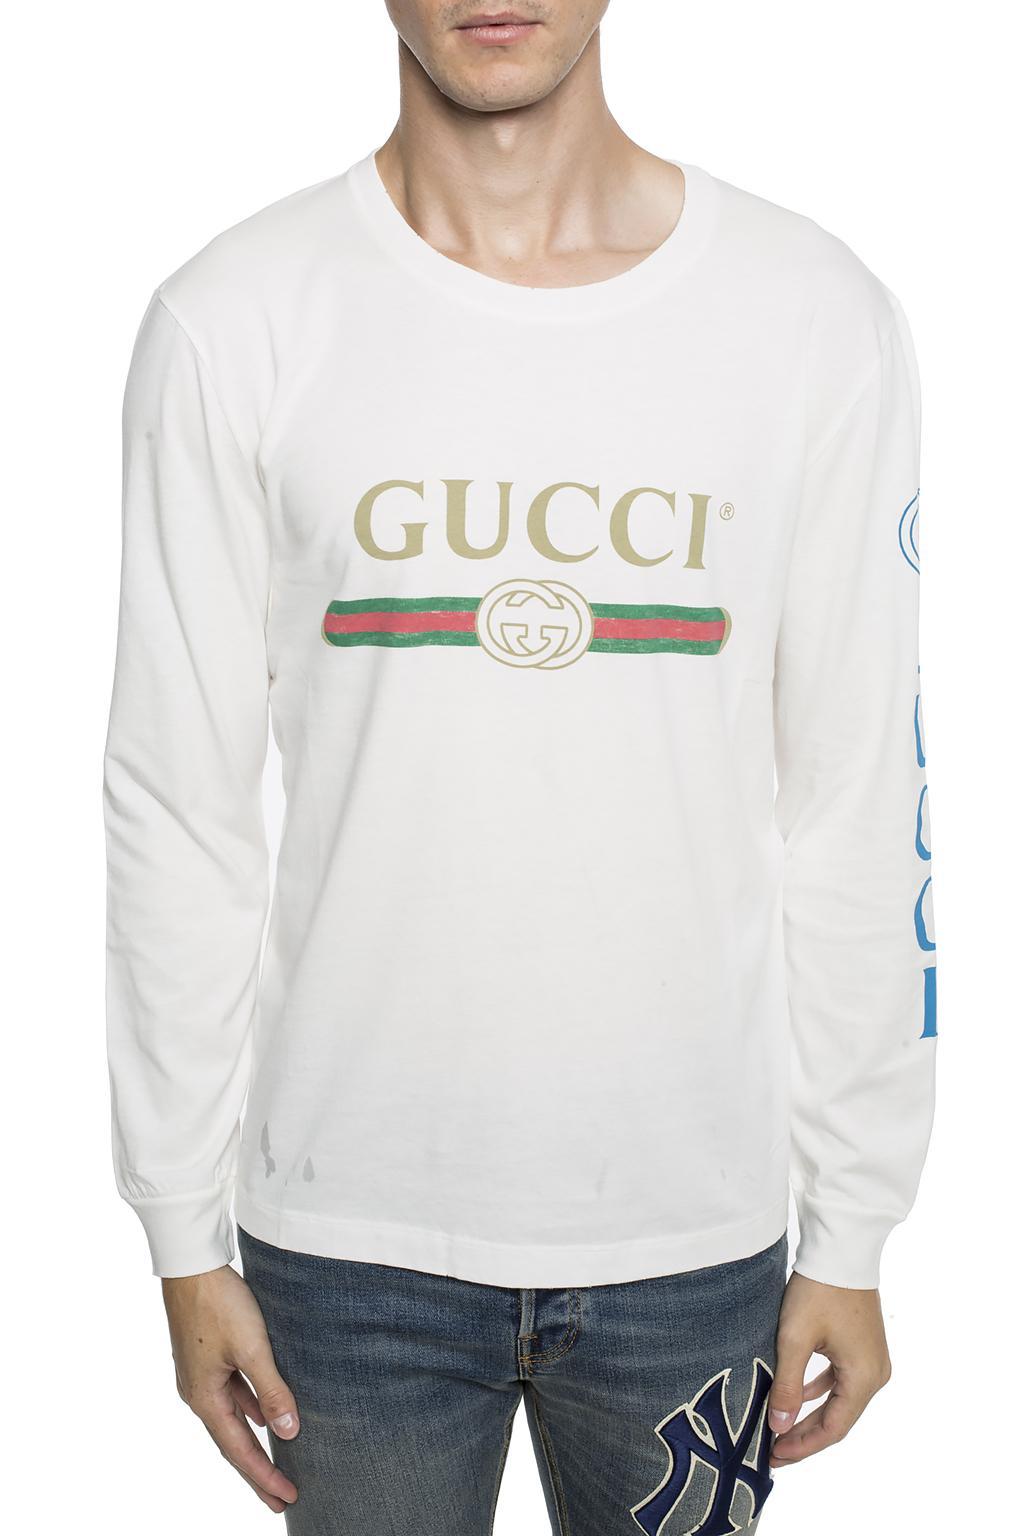 Gucci Solid 100% Cotton Long Sleeve Dress Shirts for Men for sale